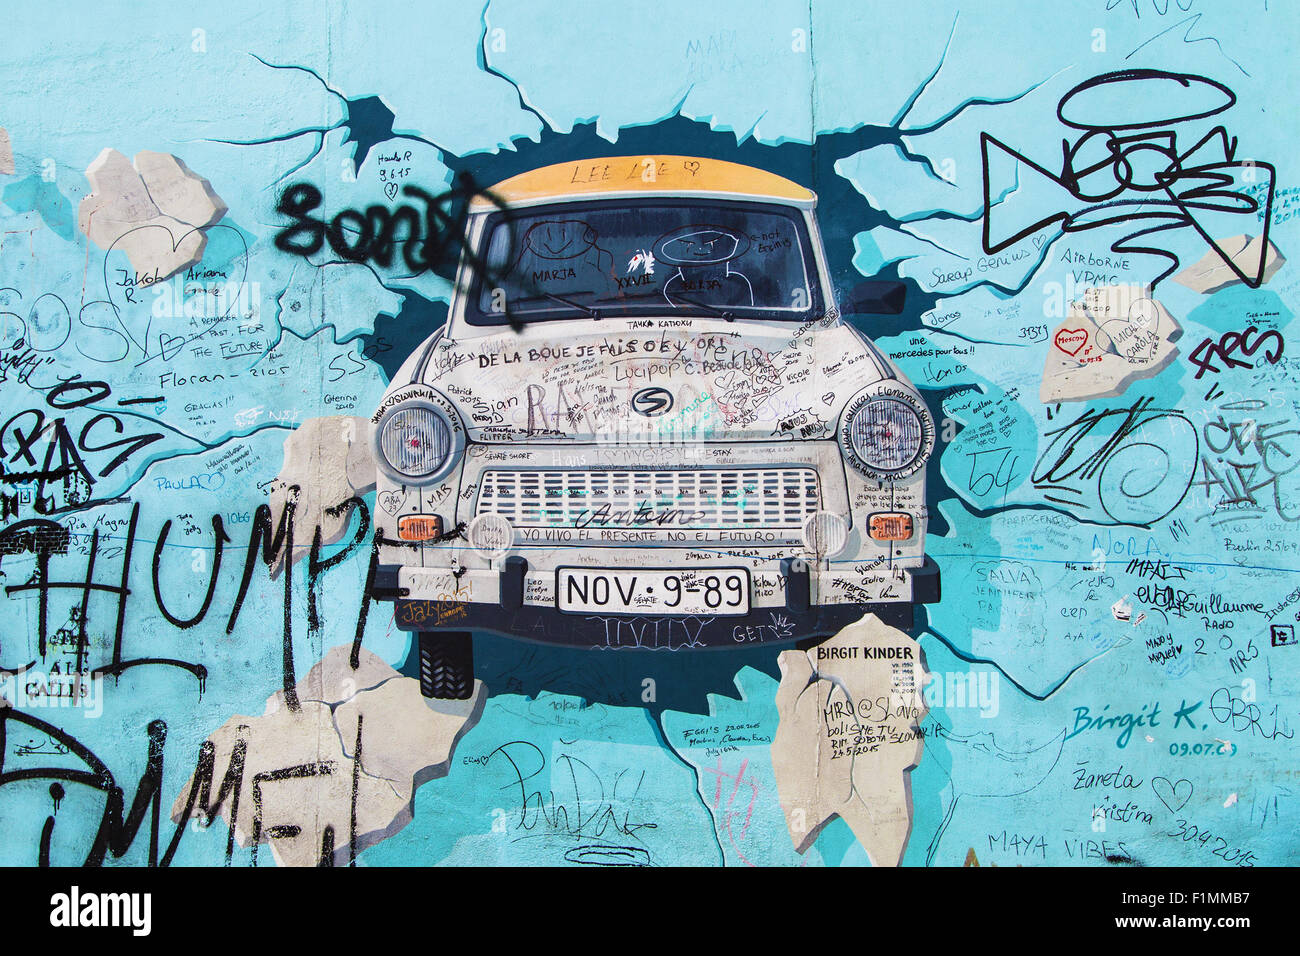 Mural 'Test the Rest' by Birgit Kinder on the East Side Gallery on August 8, 2015 in Berlin, Germany. Stock Photo